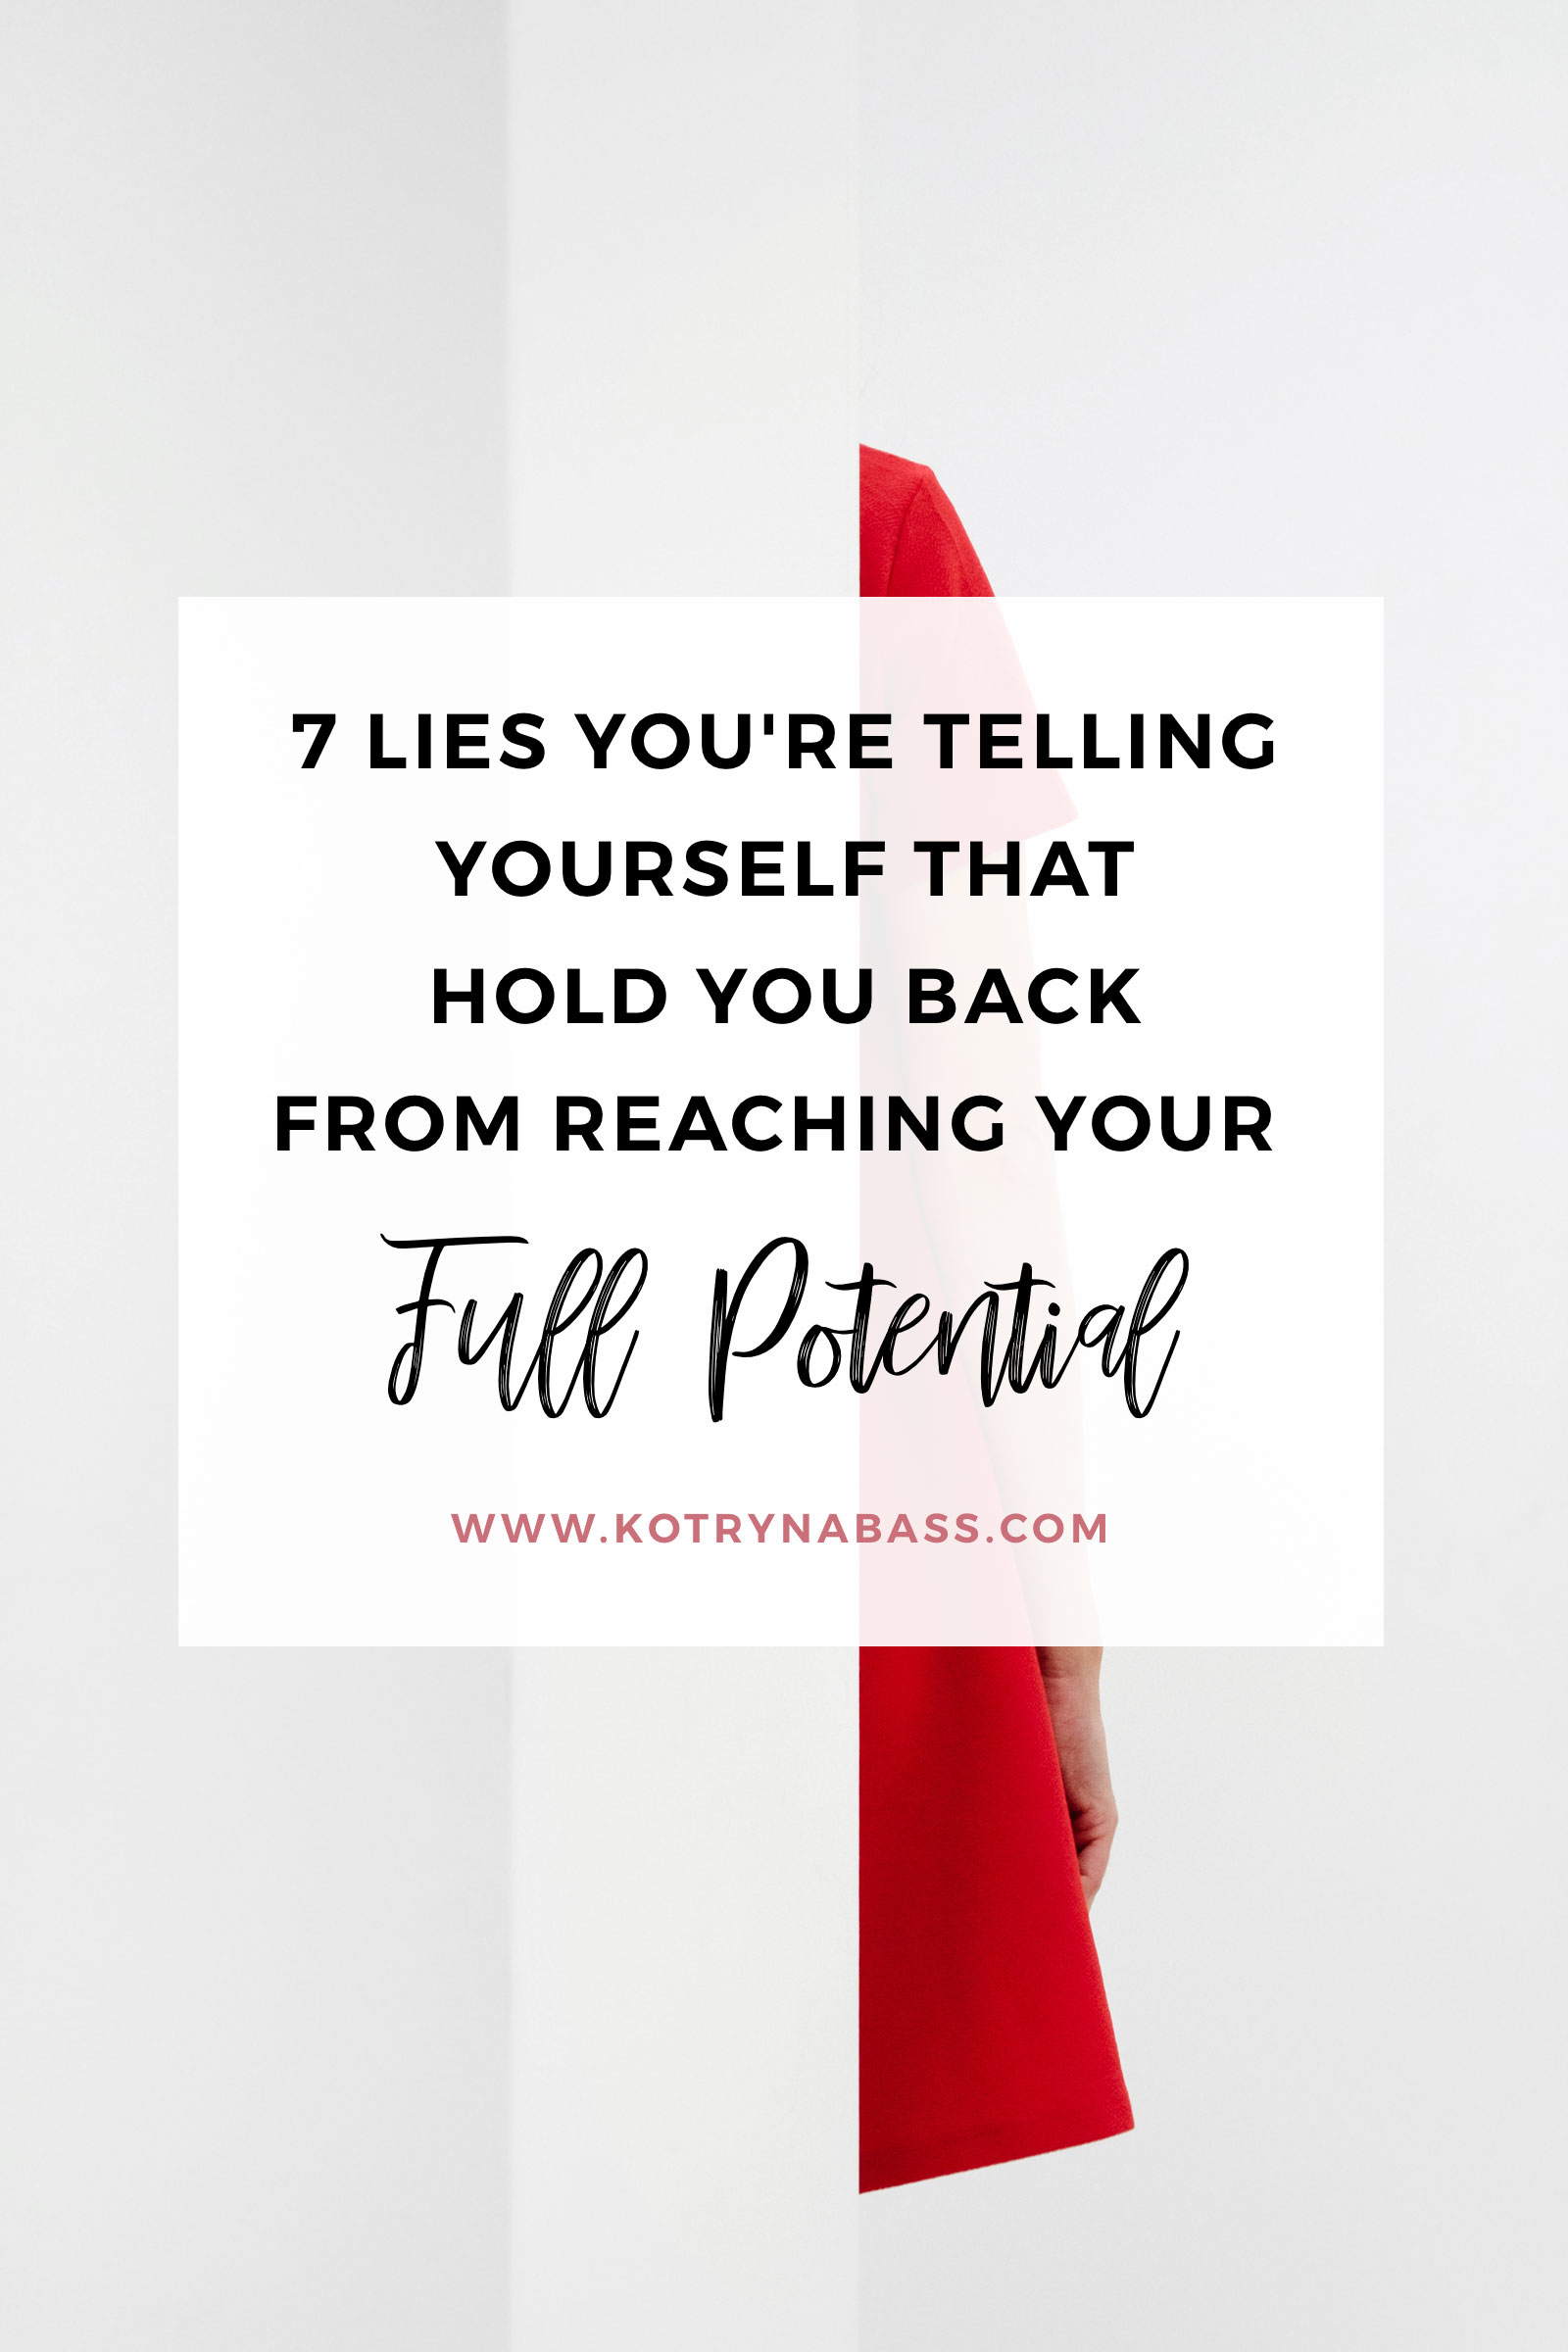 7 Lies You're Telling Yourself That Hold You Back From Reaching Your Full Potential